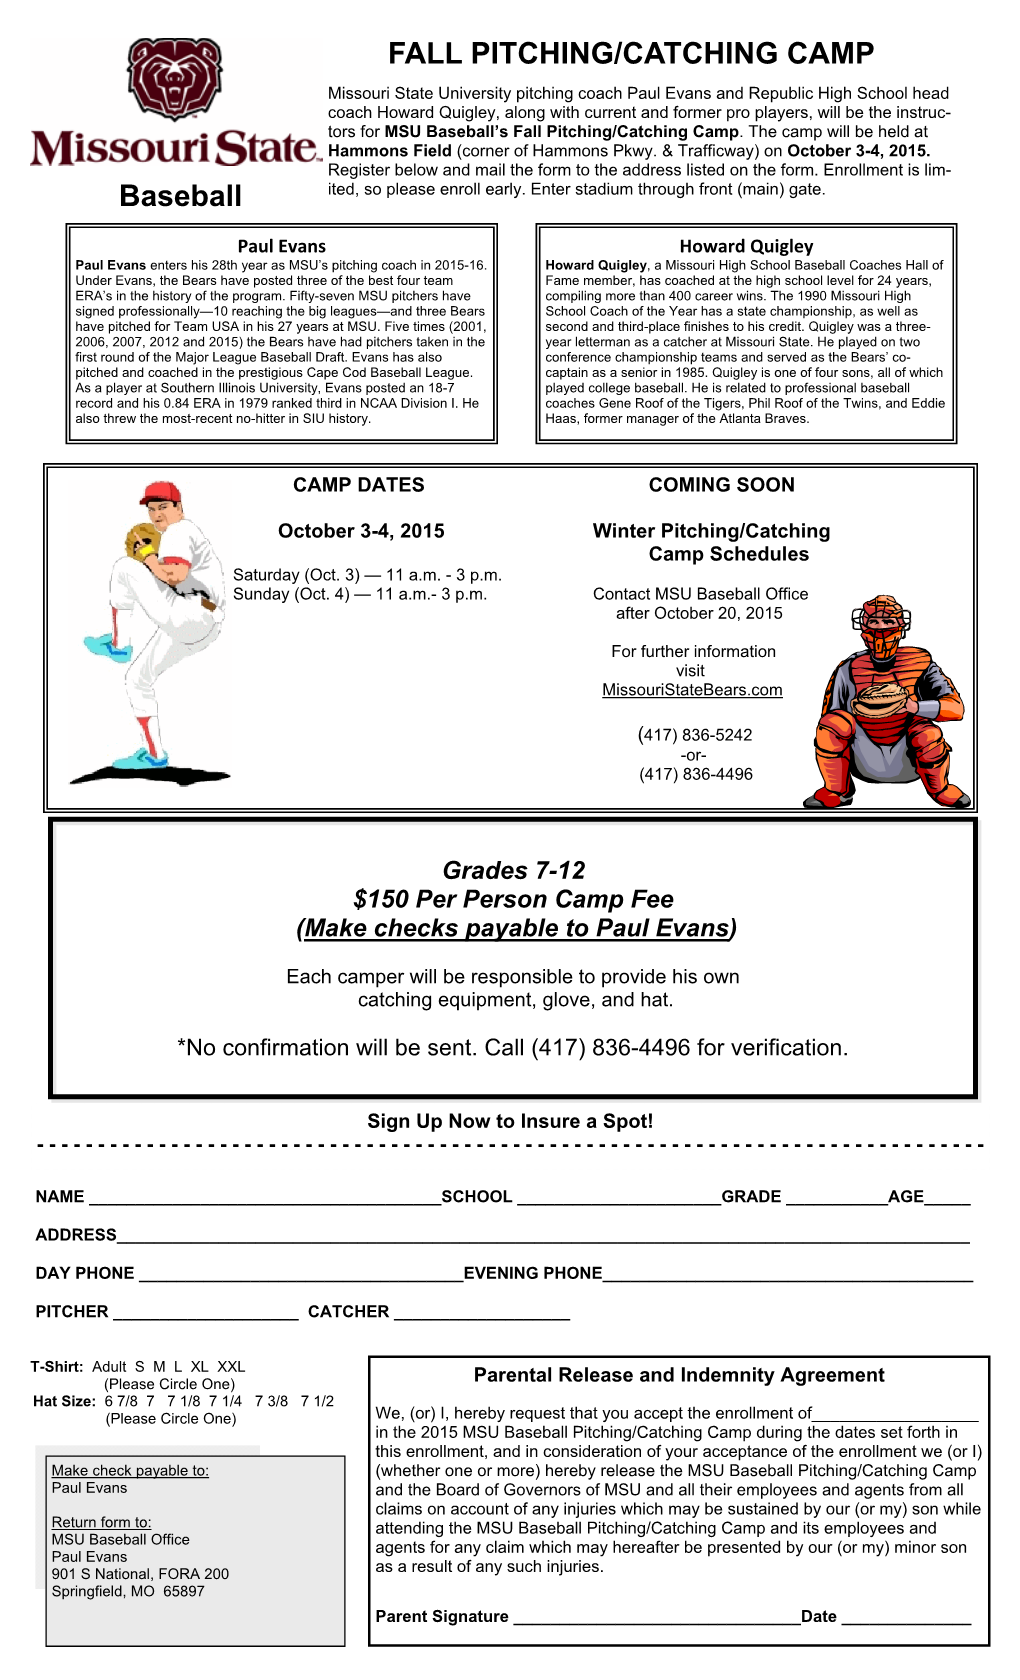 2015 Fall Pitching and Catching Camp